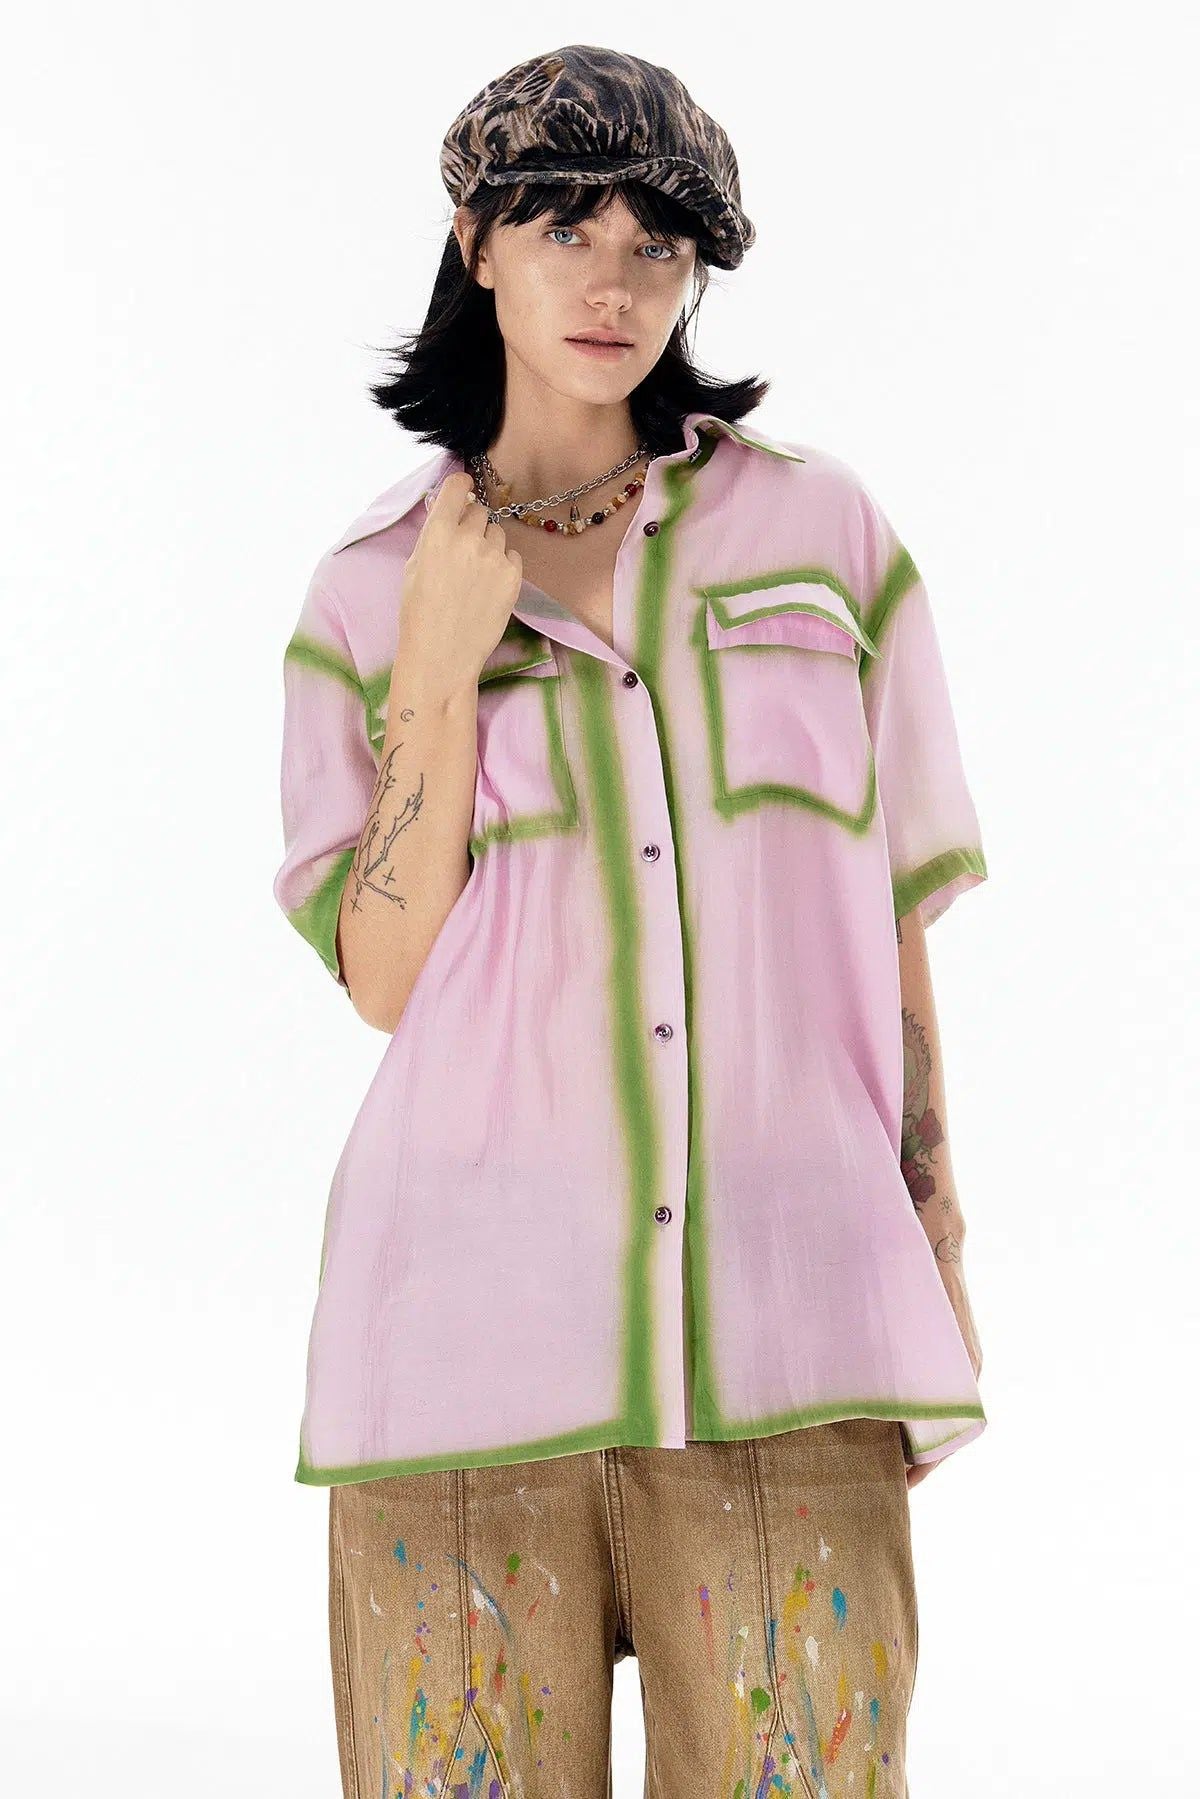 Paint Outlines Buttoned Shirt Korean Street Fashion Shirt By 7440 37 1 Shop Online at OH Vault